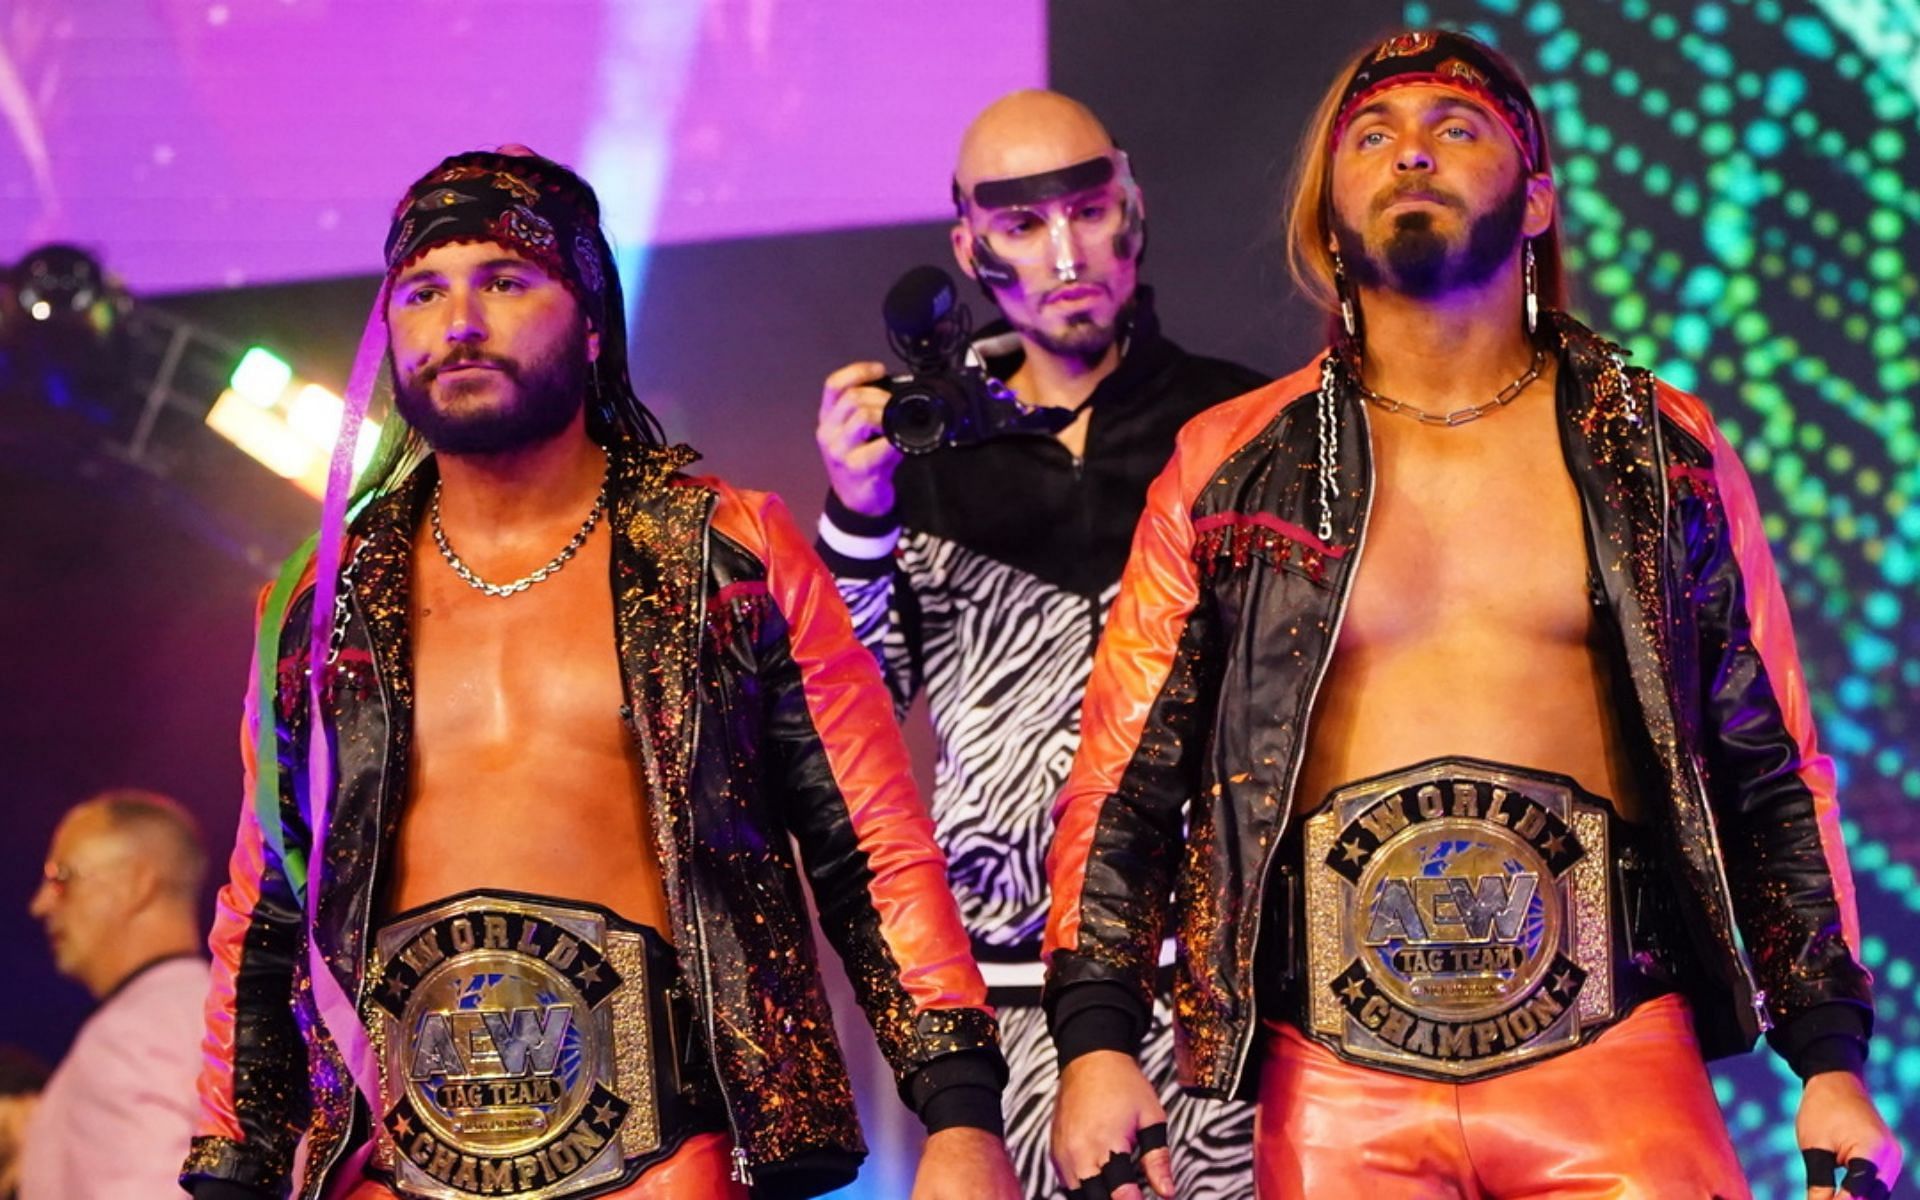 AEW World Tag Team Champions The Young Bucks